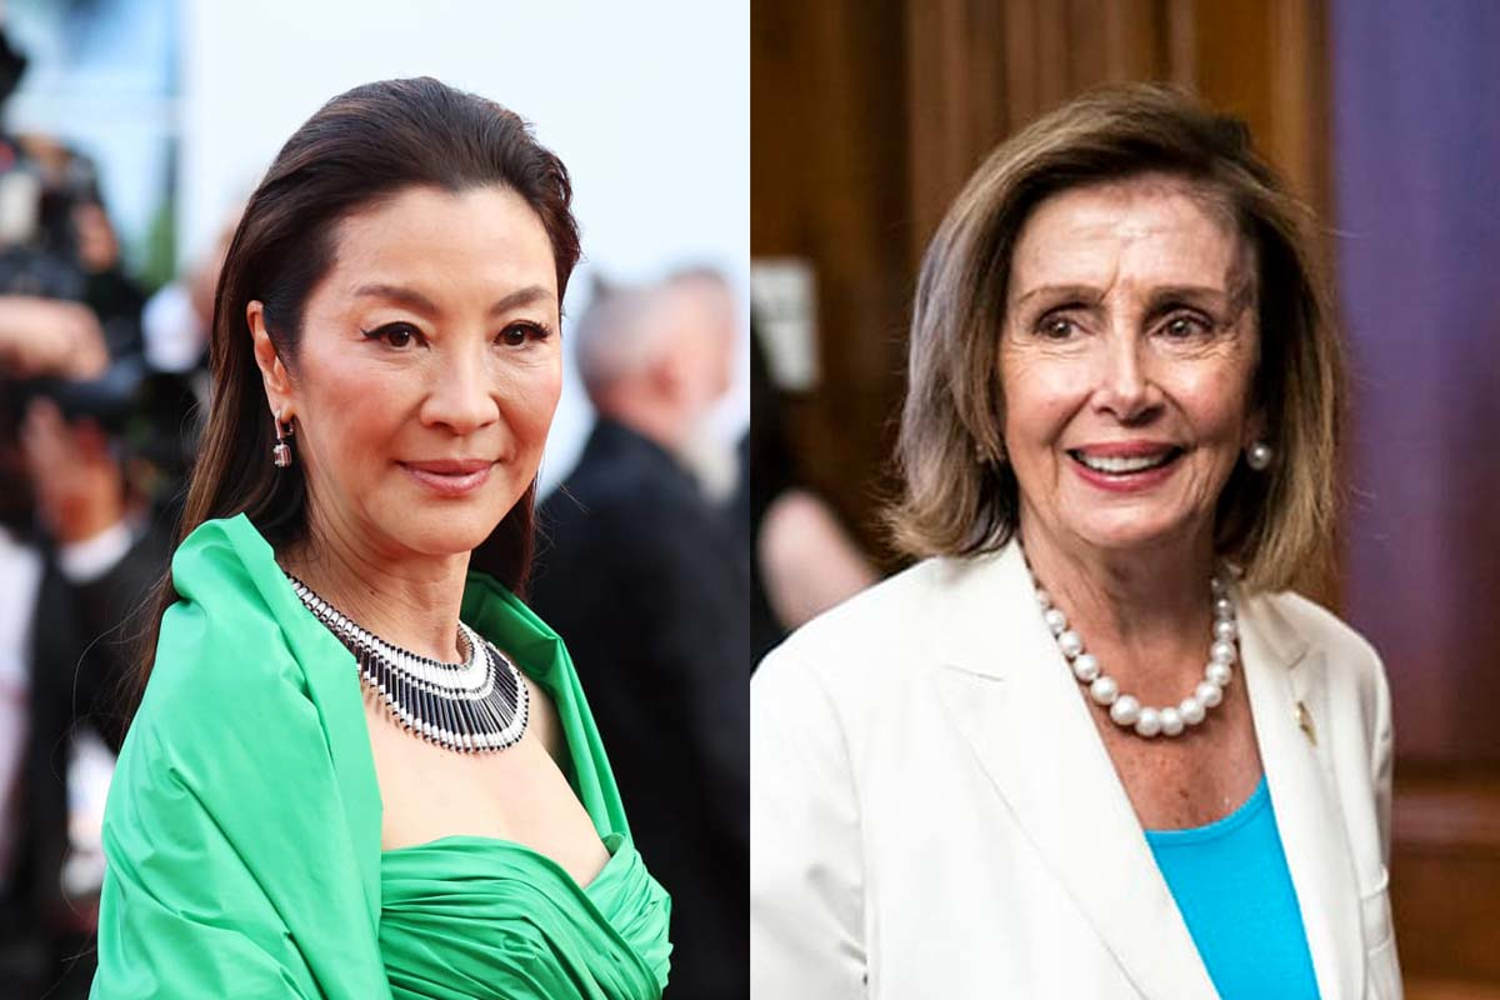 Biden to award Presidential Medal of Freedom to recipients including Nancy Pelosi, Michelle Yeoh